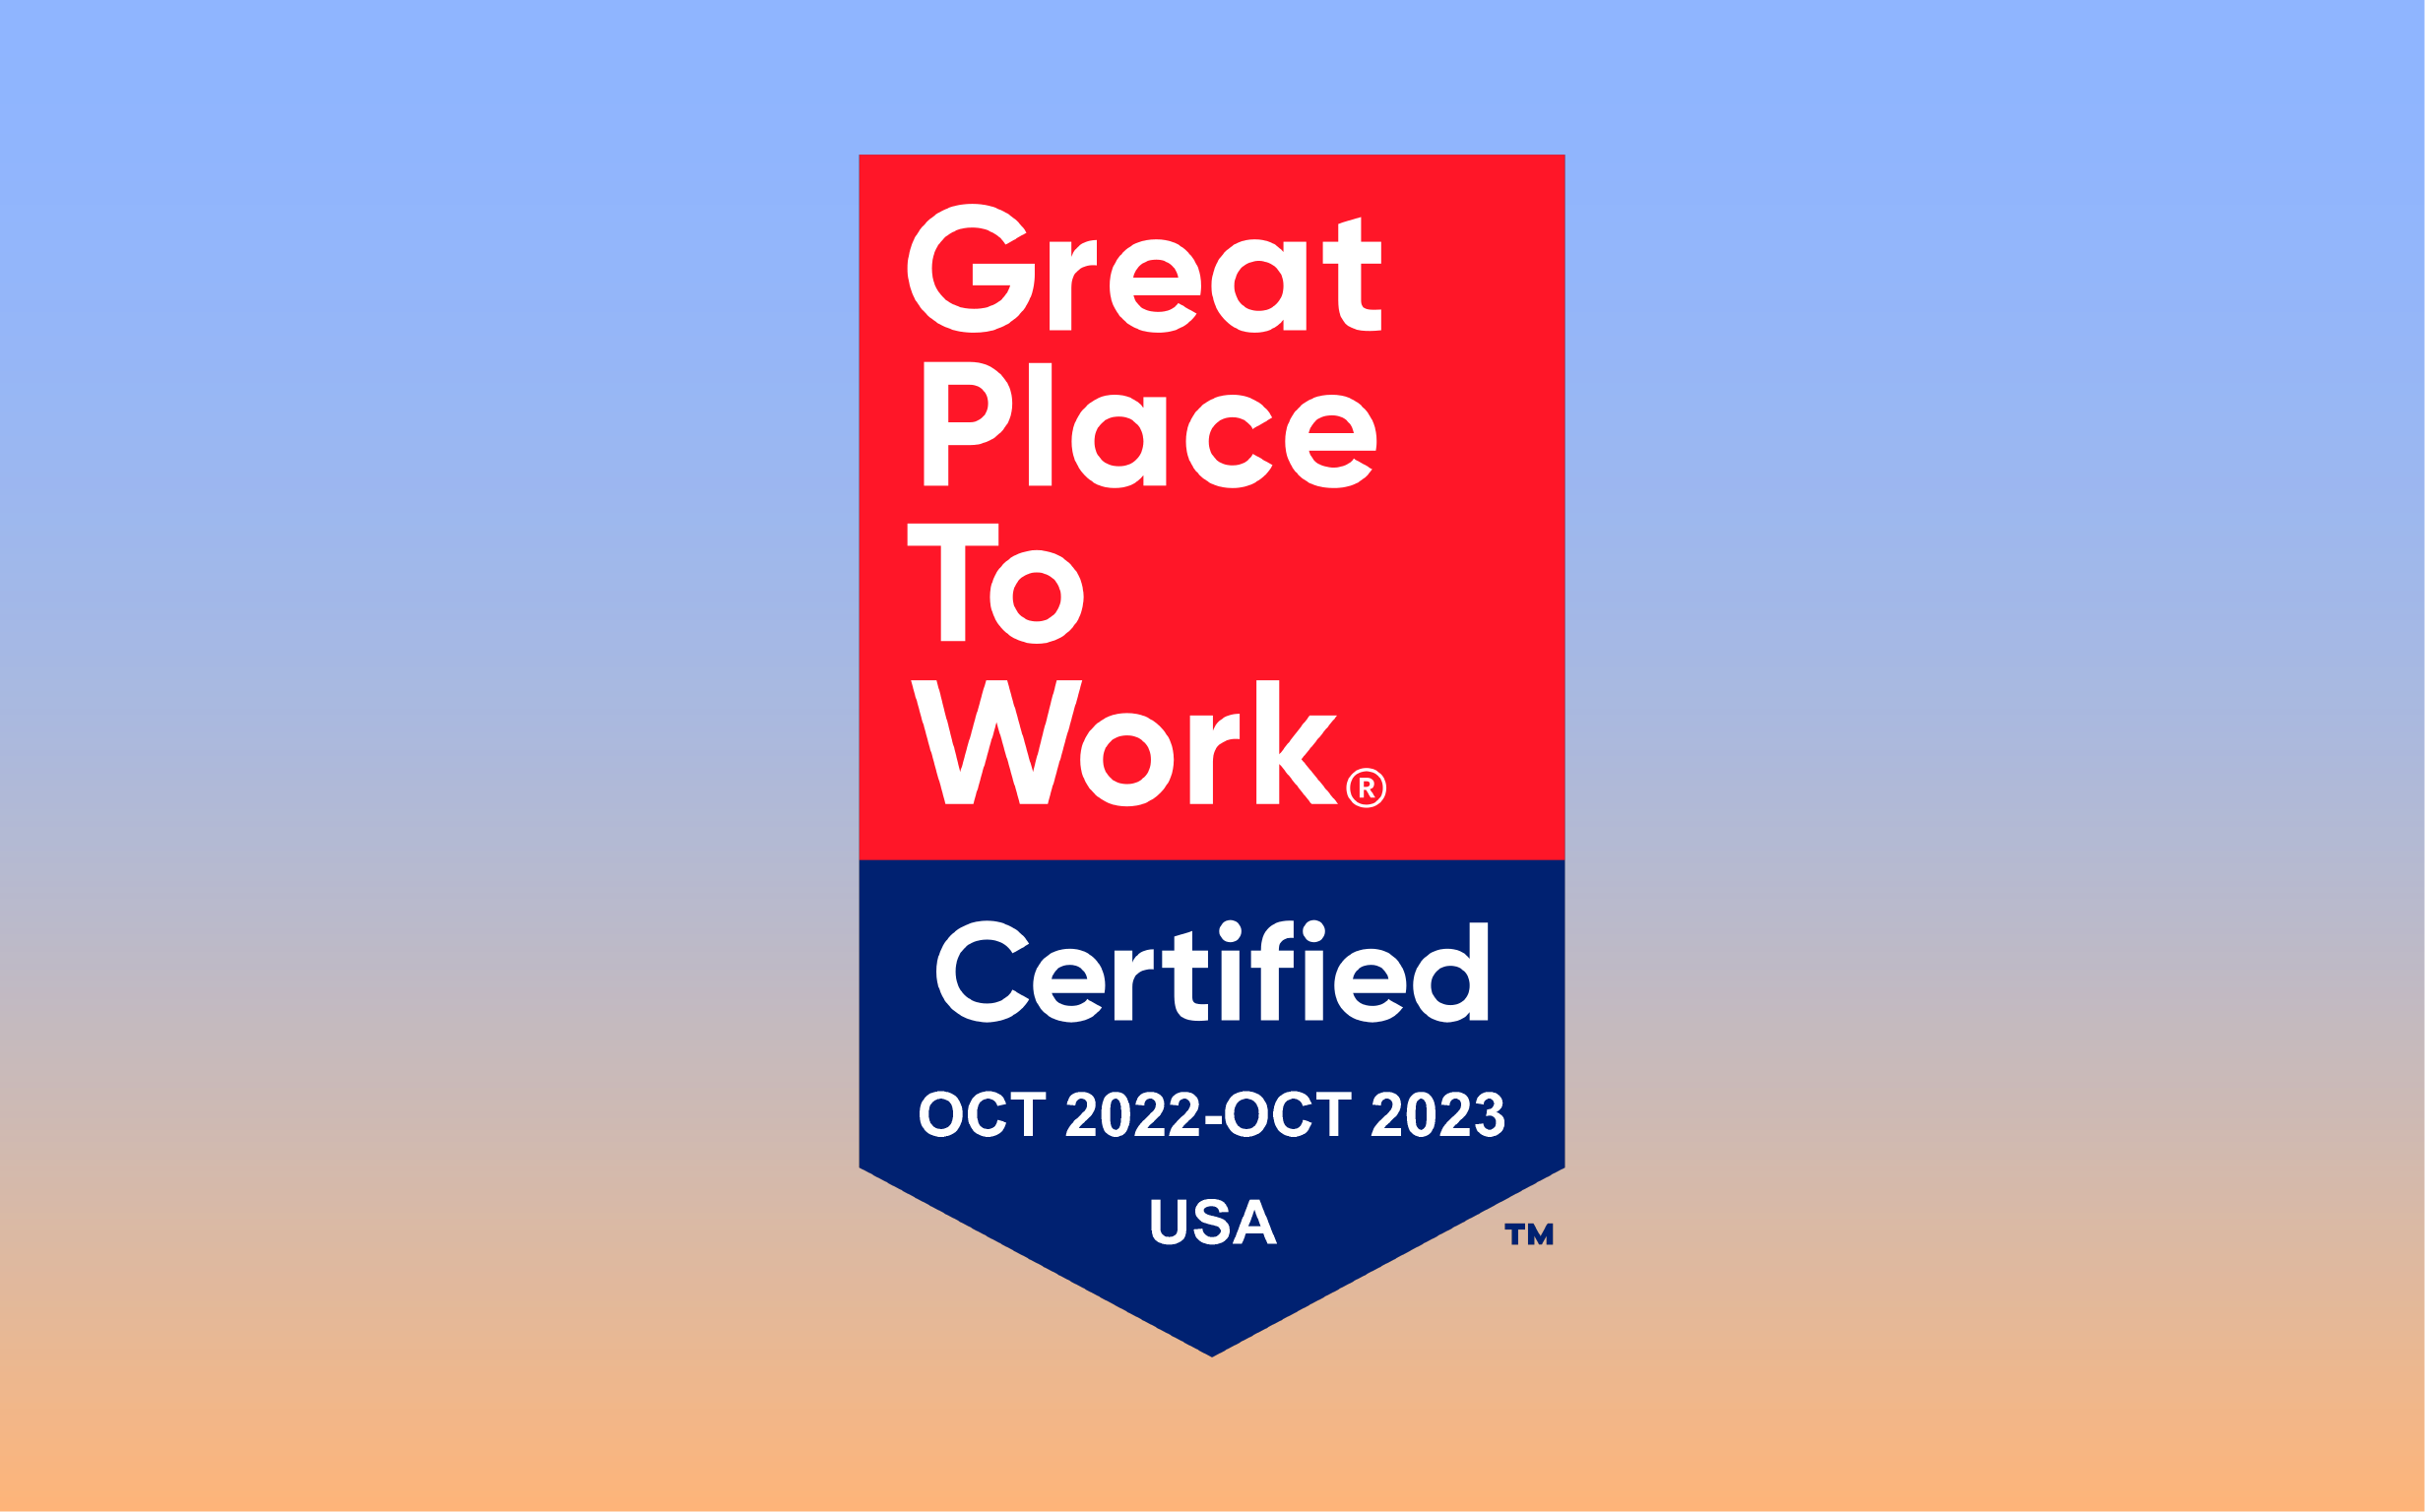 LogicMonitor Earns Great Place to Work Certification™ for Fourth Consecutive Year